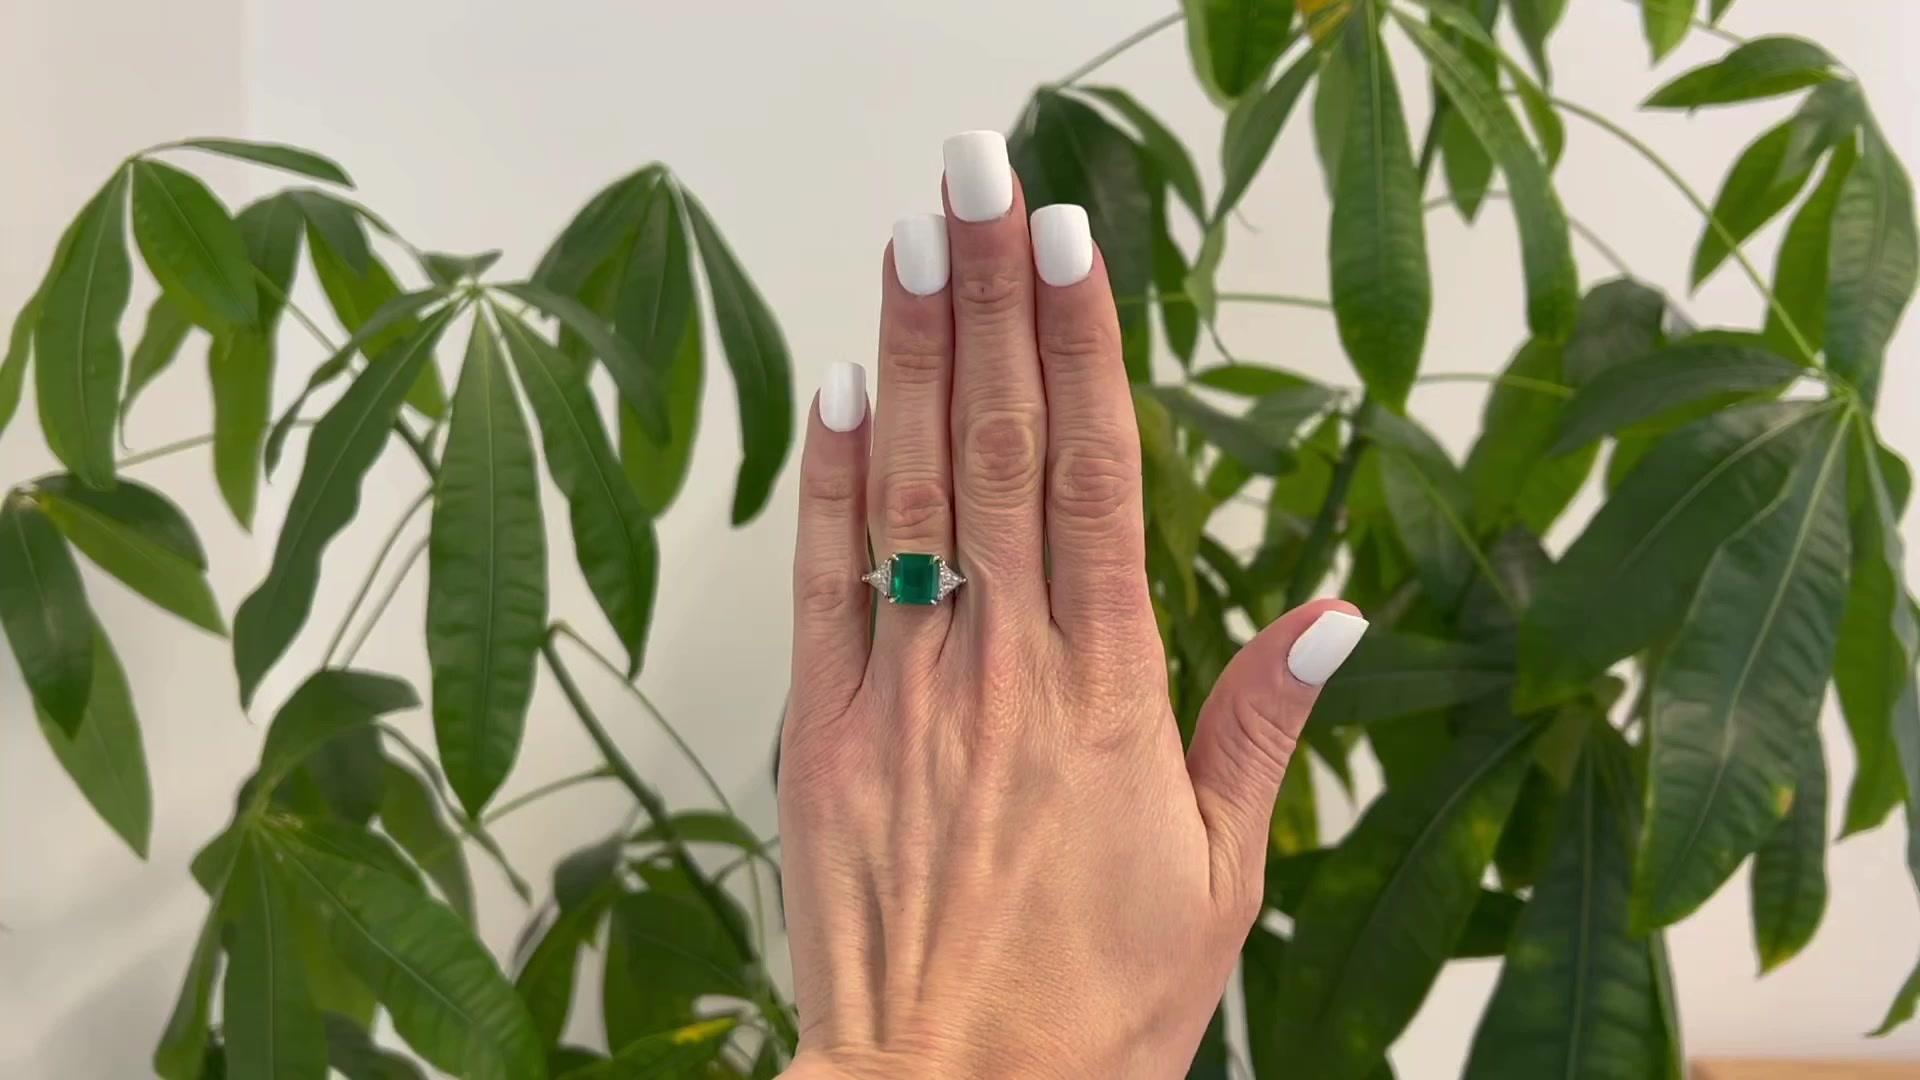 One GIA 4.10 Carats Colombian Emerald Diamond Three Stone Ring. Featuring one GIA octagonal step cut emerald of 4.10 carats, accompanied with GIA #2185721009 stating the emerald is of Colombian origin. Accented by two trillion cut diamonds with a